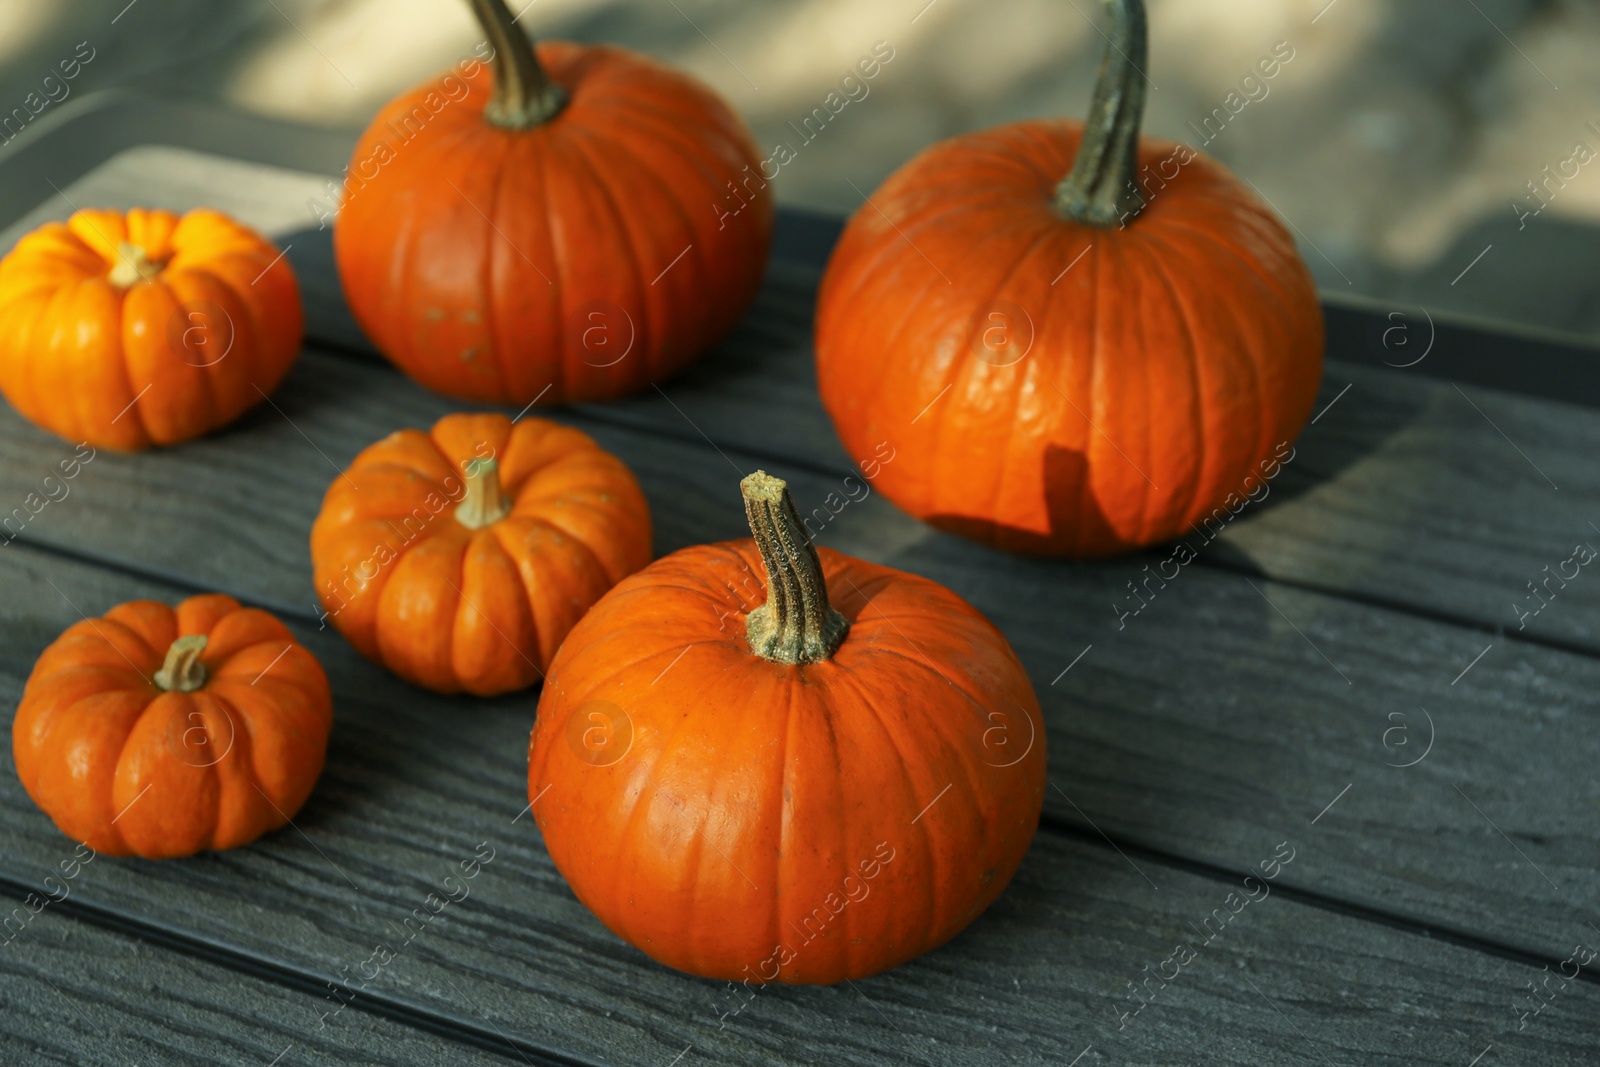 Photo of Many whole ripe pumpkins on wooden table outdoors